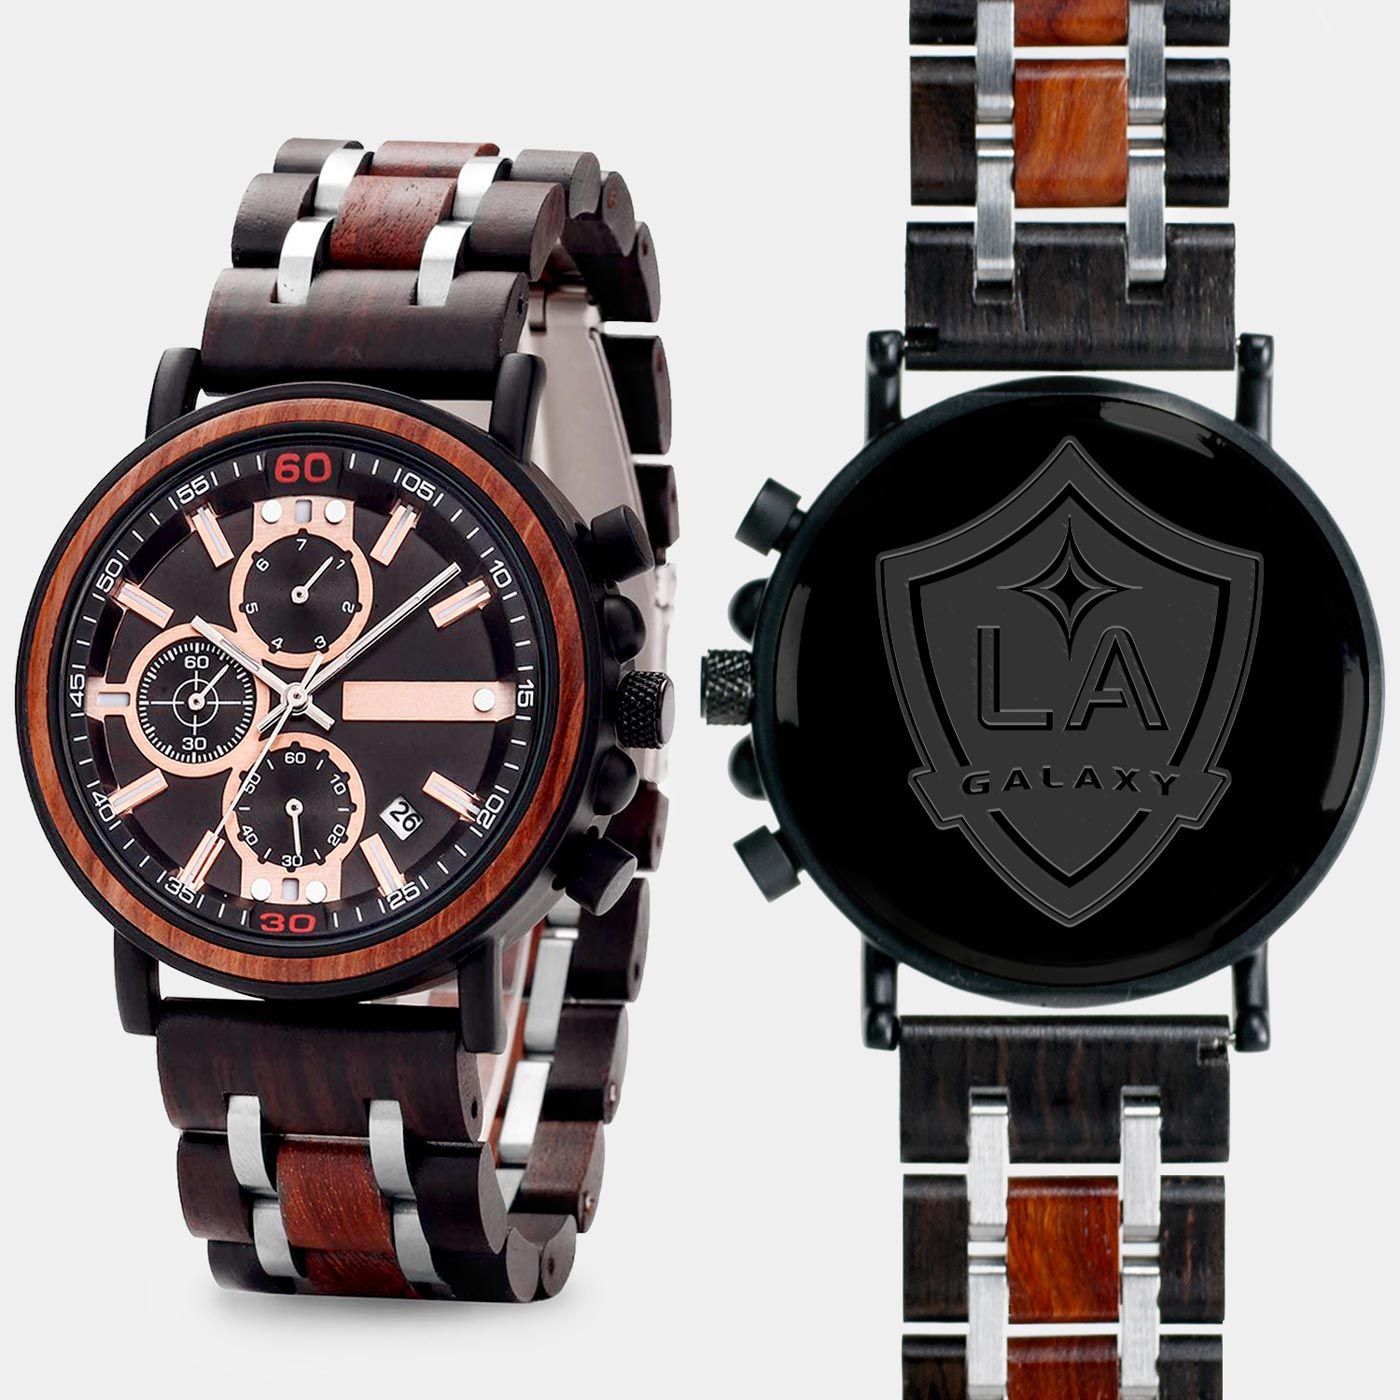 Los Angeles Galaxy Mens Wrist Watch  - Personalized Los Angeles Galaxy Mens Watches - Custom Gifts For Him, Birthday Gifts, Gift For Dad - Best 2022 Los Angeles Galaxy Christmas Gifts - Black 45mm MLS Wood Watch